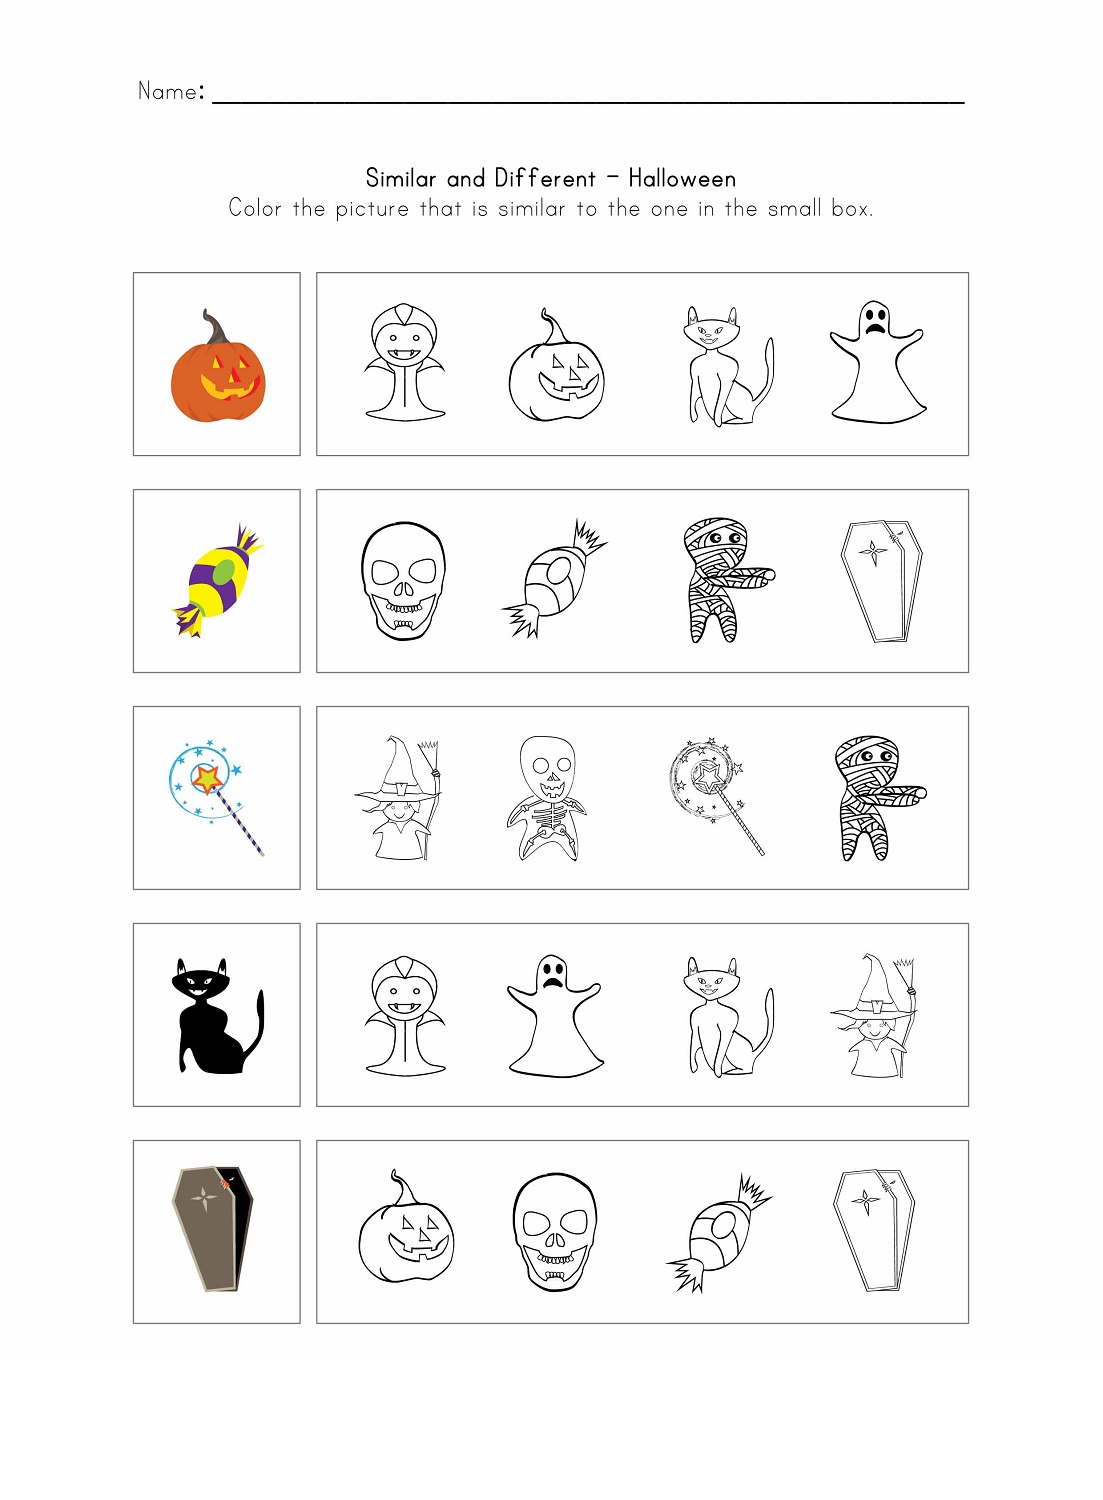 same-and-different-worksheets-halloween